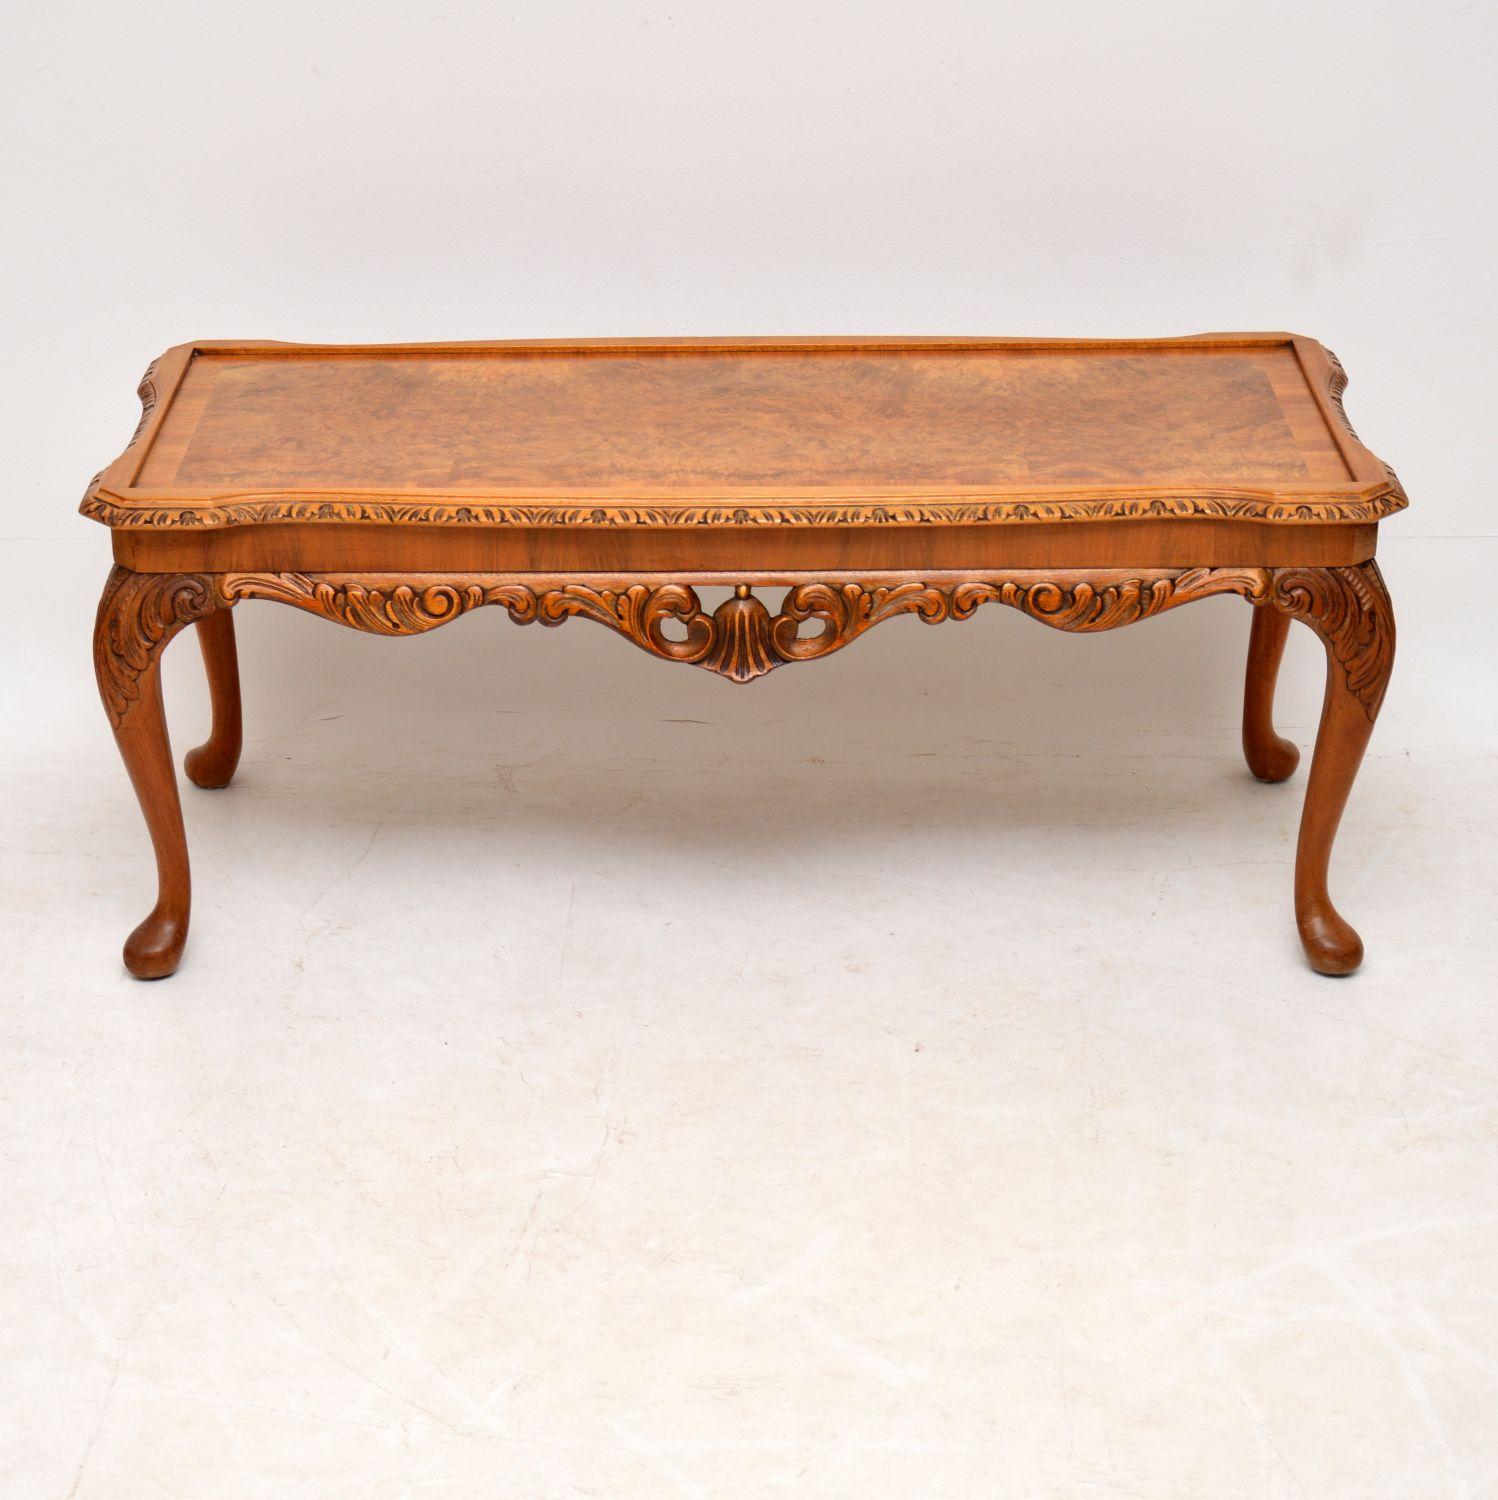 Antique Queen Anne style walnut coffee table in excellent condition and dating to circa 1930s period. It has a crossbanded burr walnut top, with shaped carved edges, plus fine carvings between and on the solid walnut legs. This coffee table has just